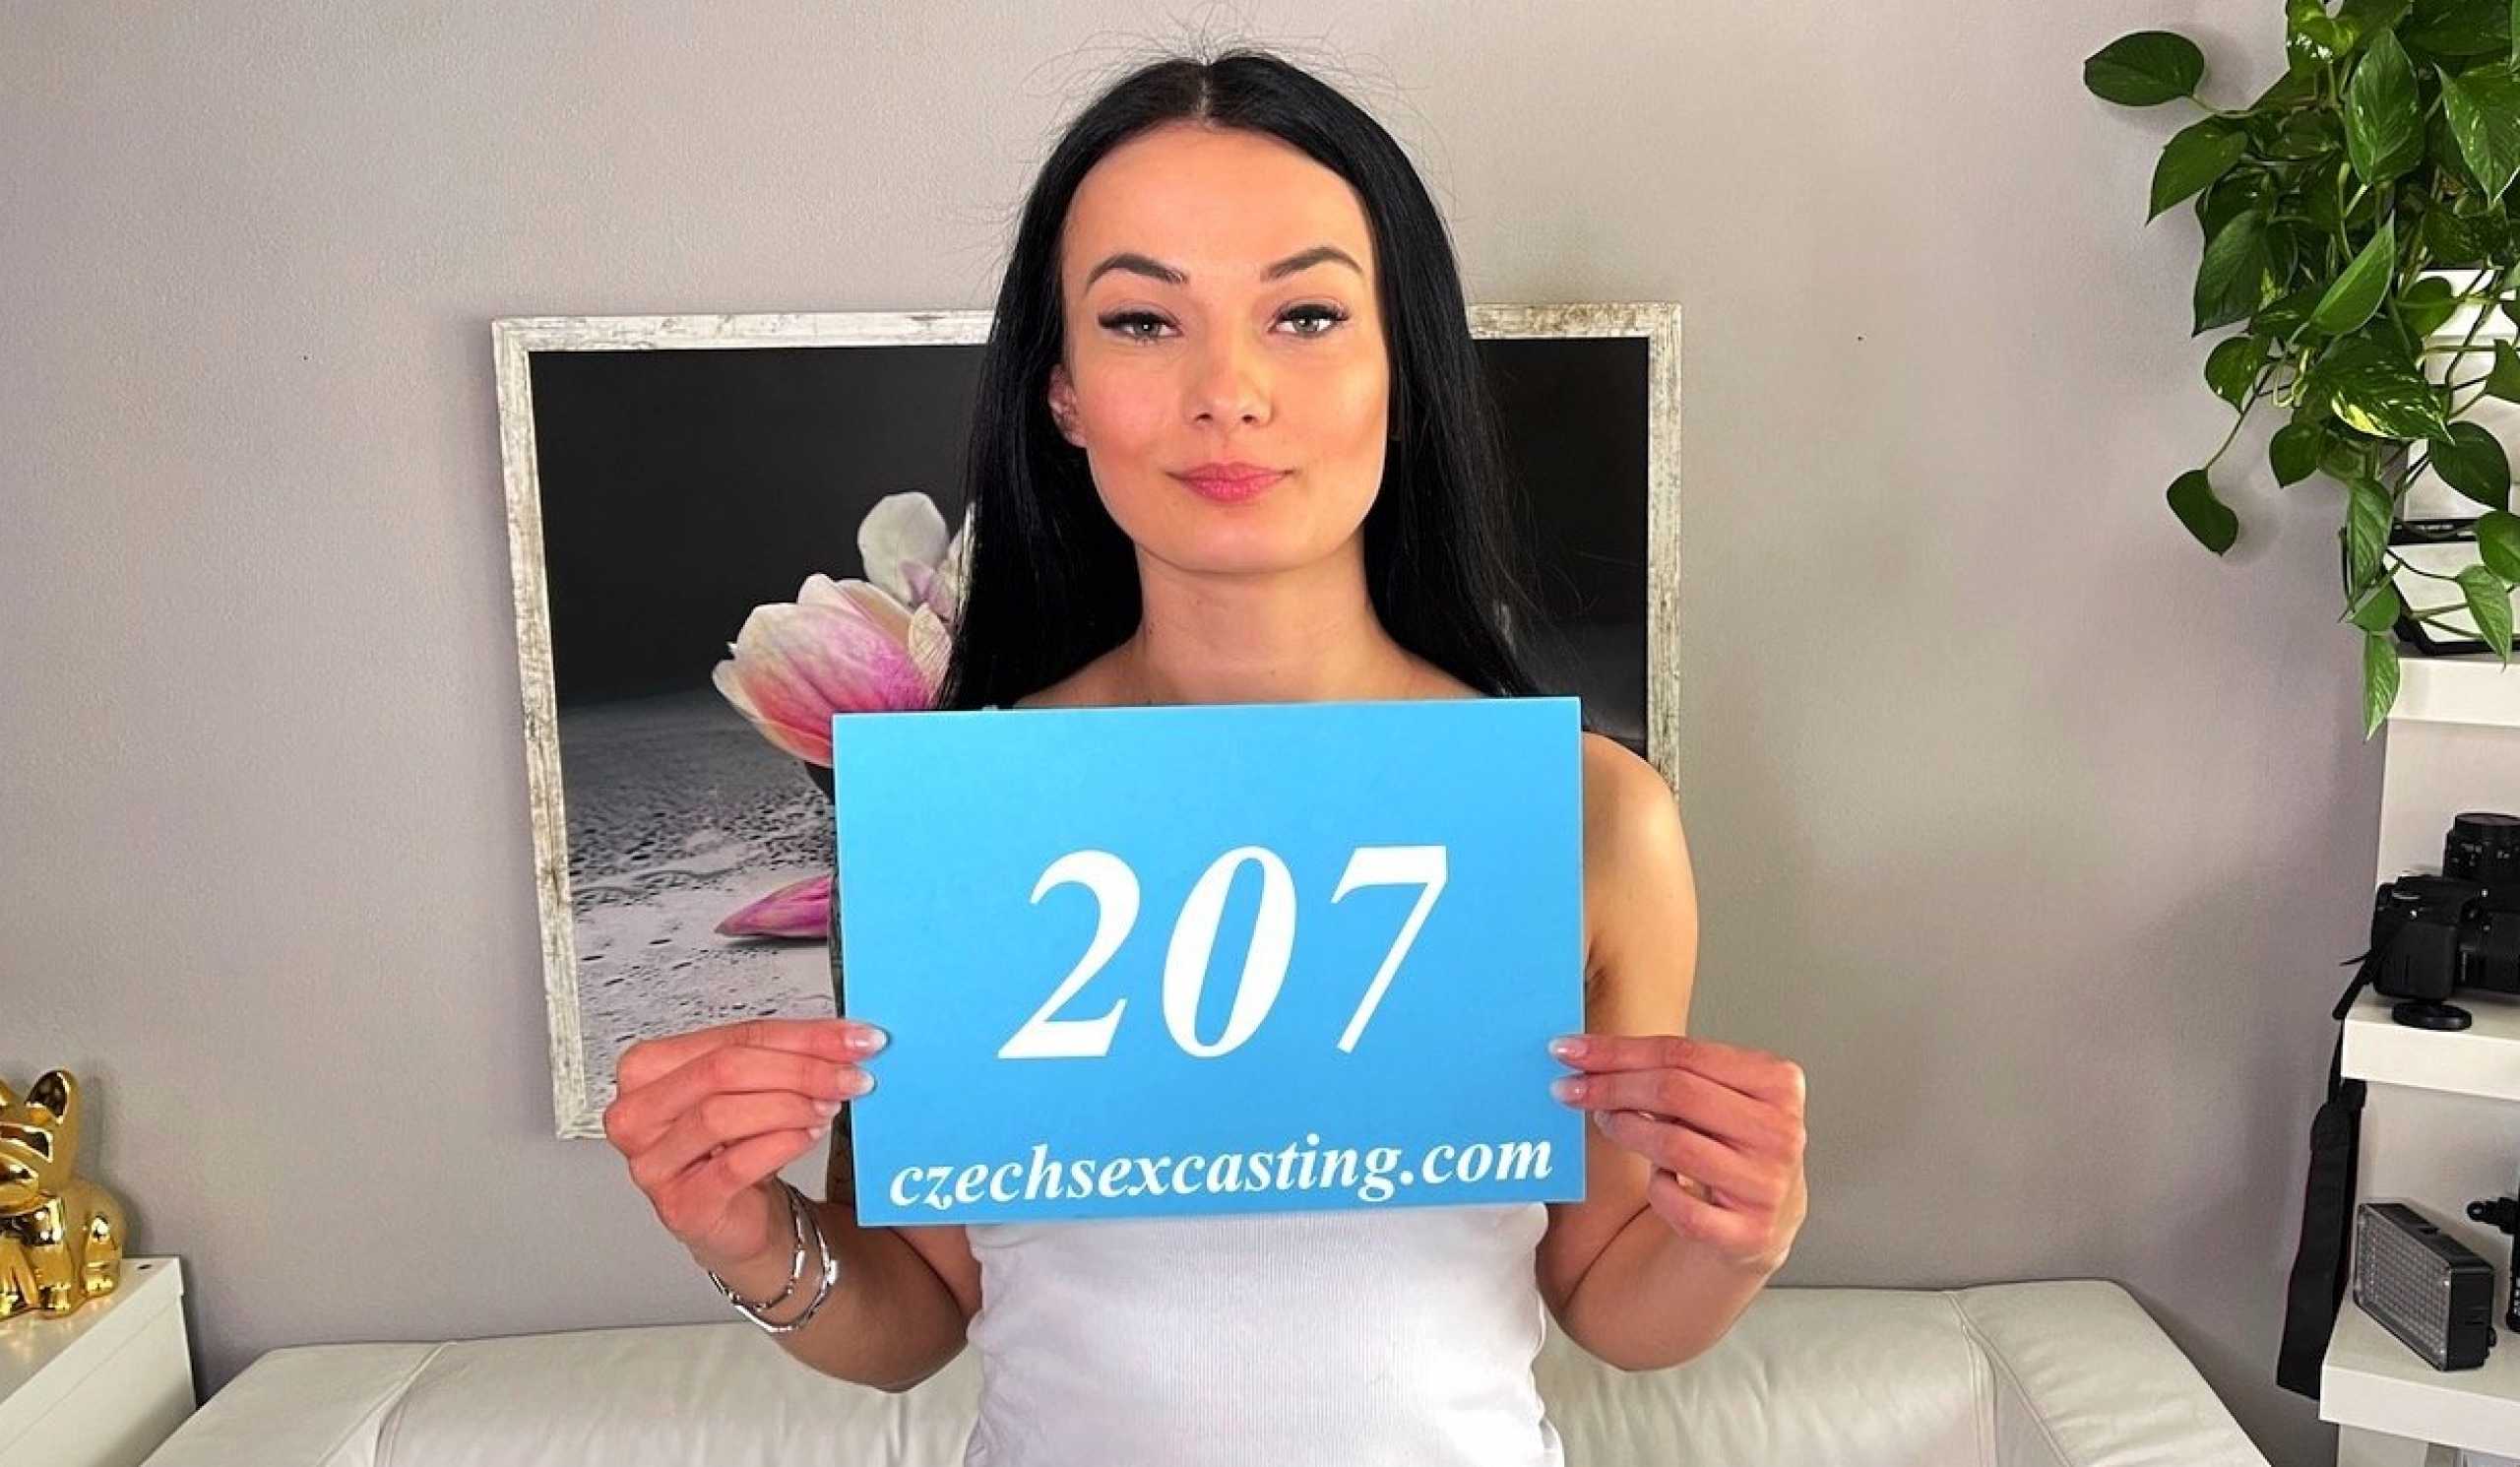 CzechSexCasting &#8211; Maddy Black &#8211; Czech sexy brunette fucked in photo shoot, PervTube.net